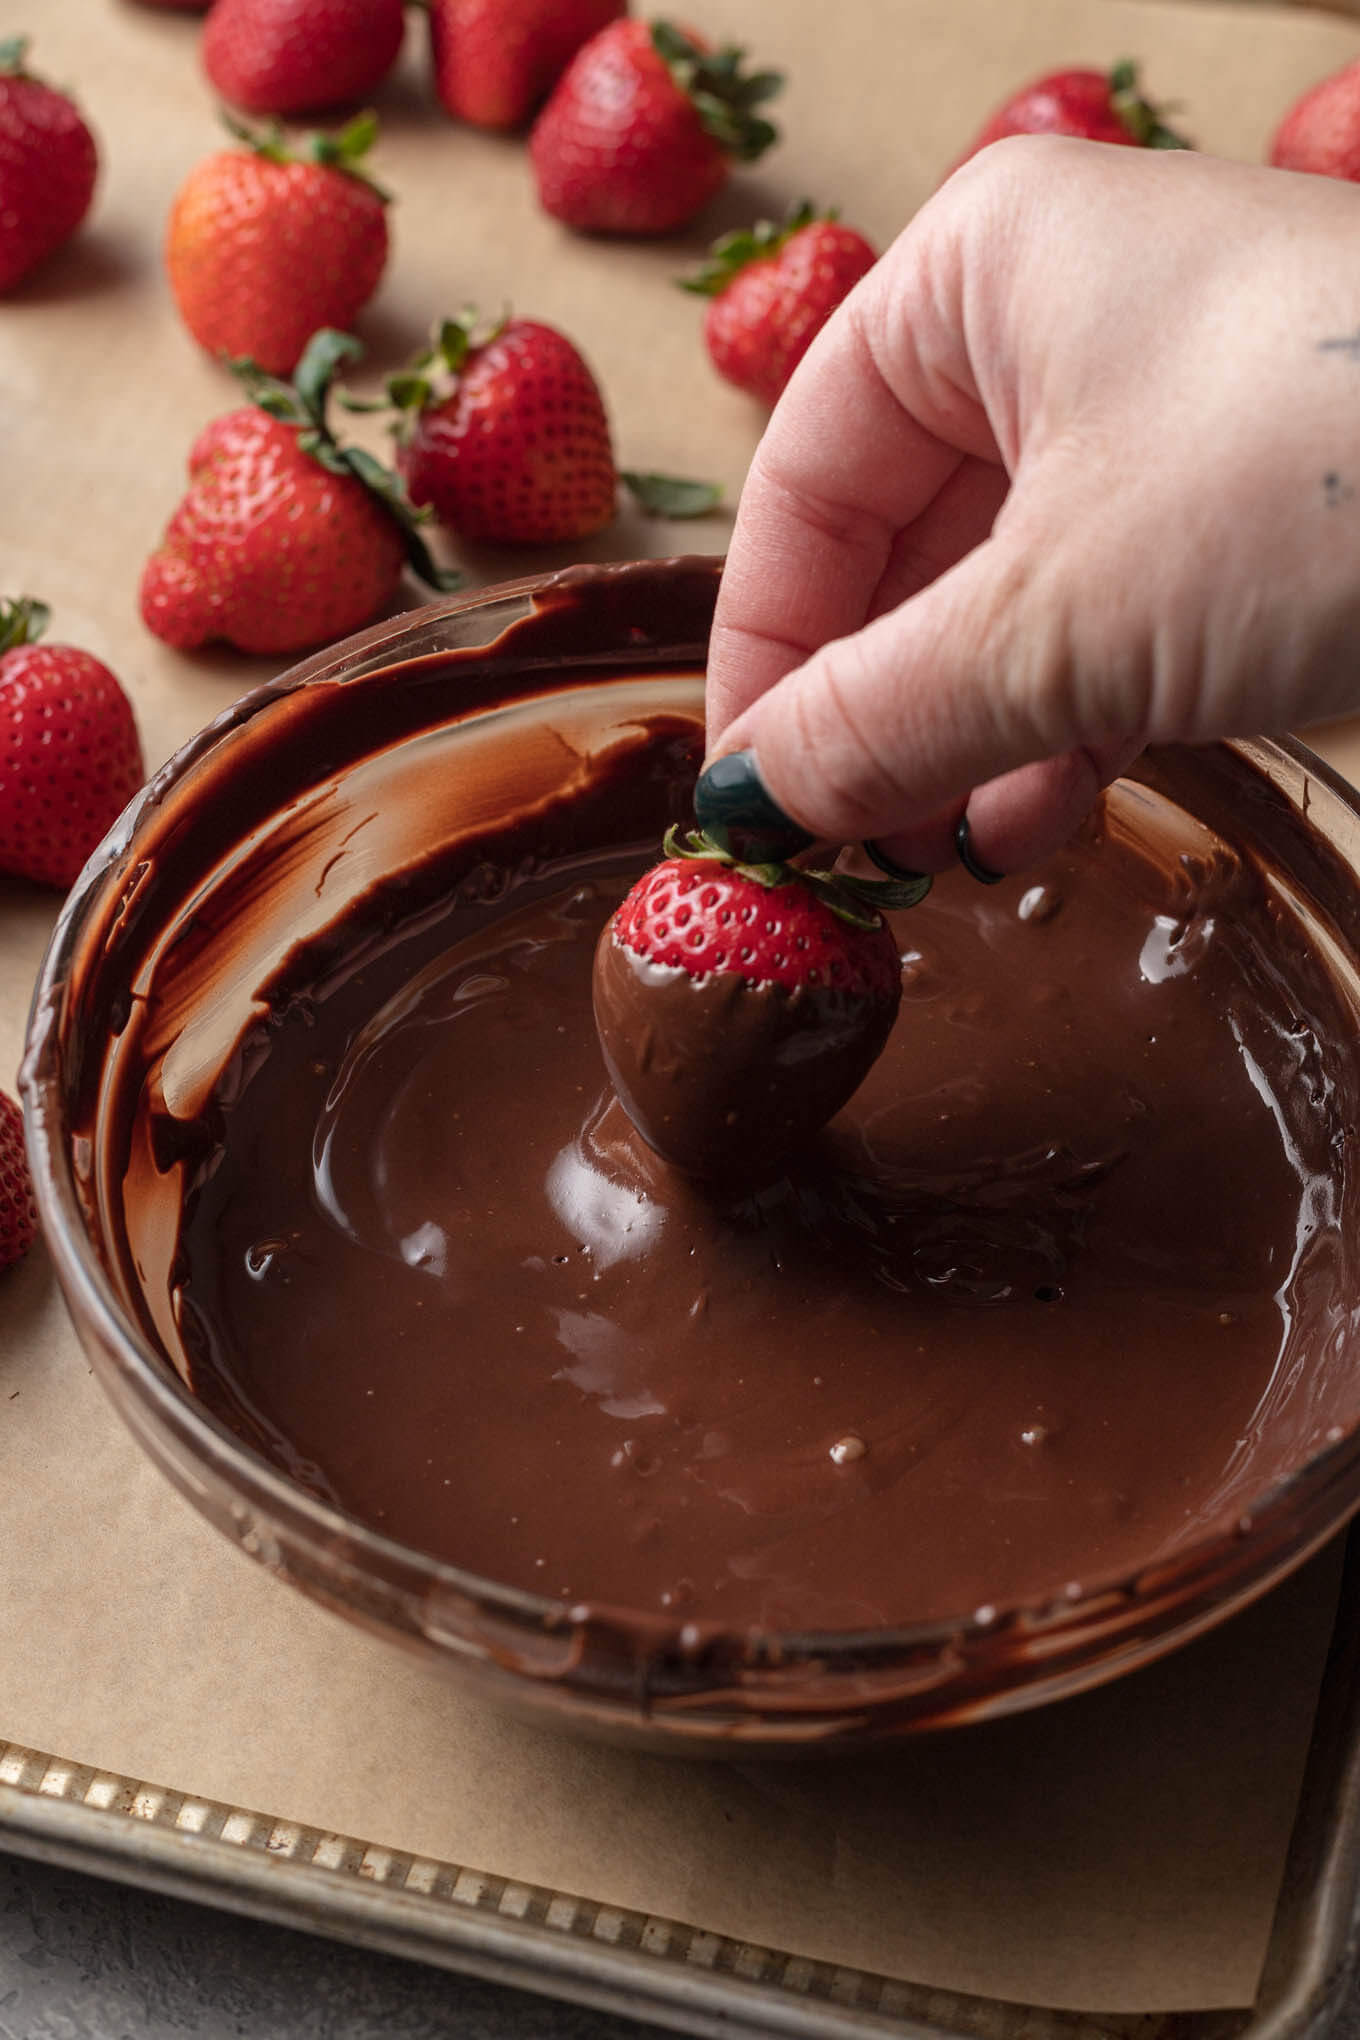 A fresh strawberry being coated in tempered chocolate.